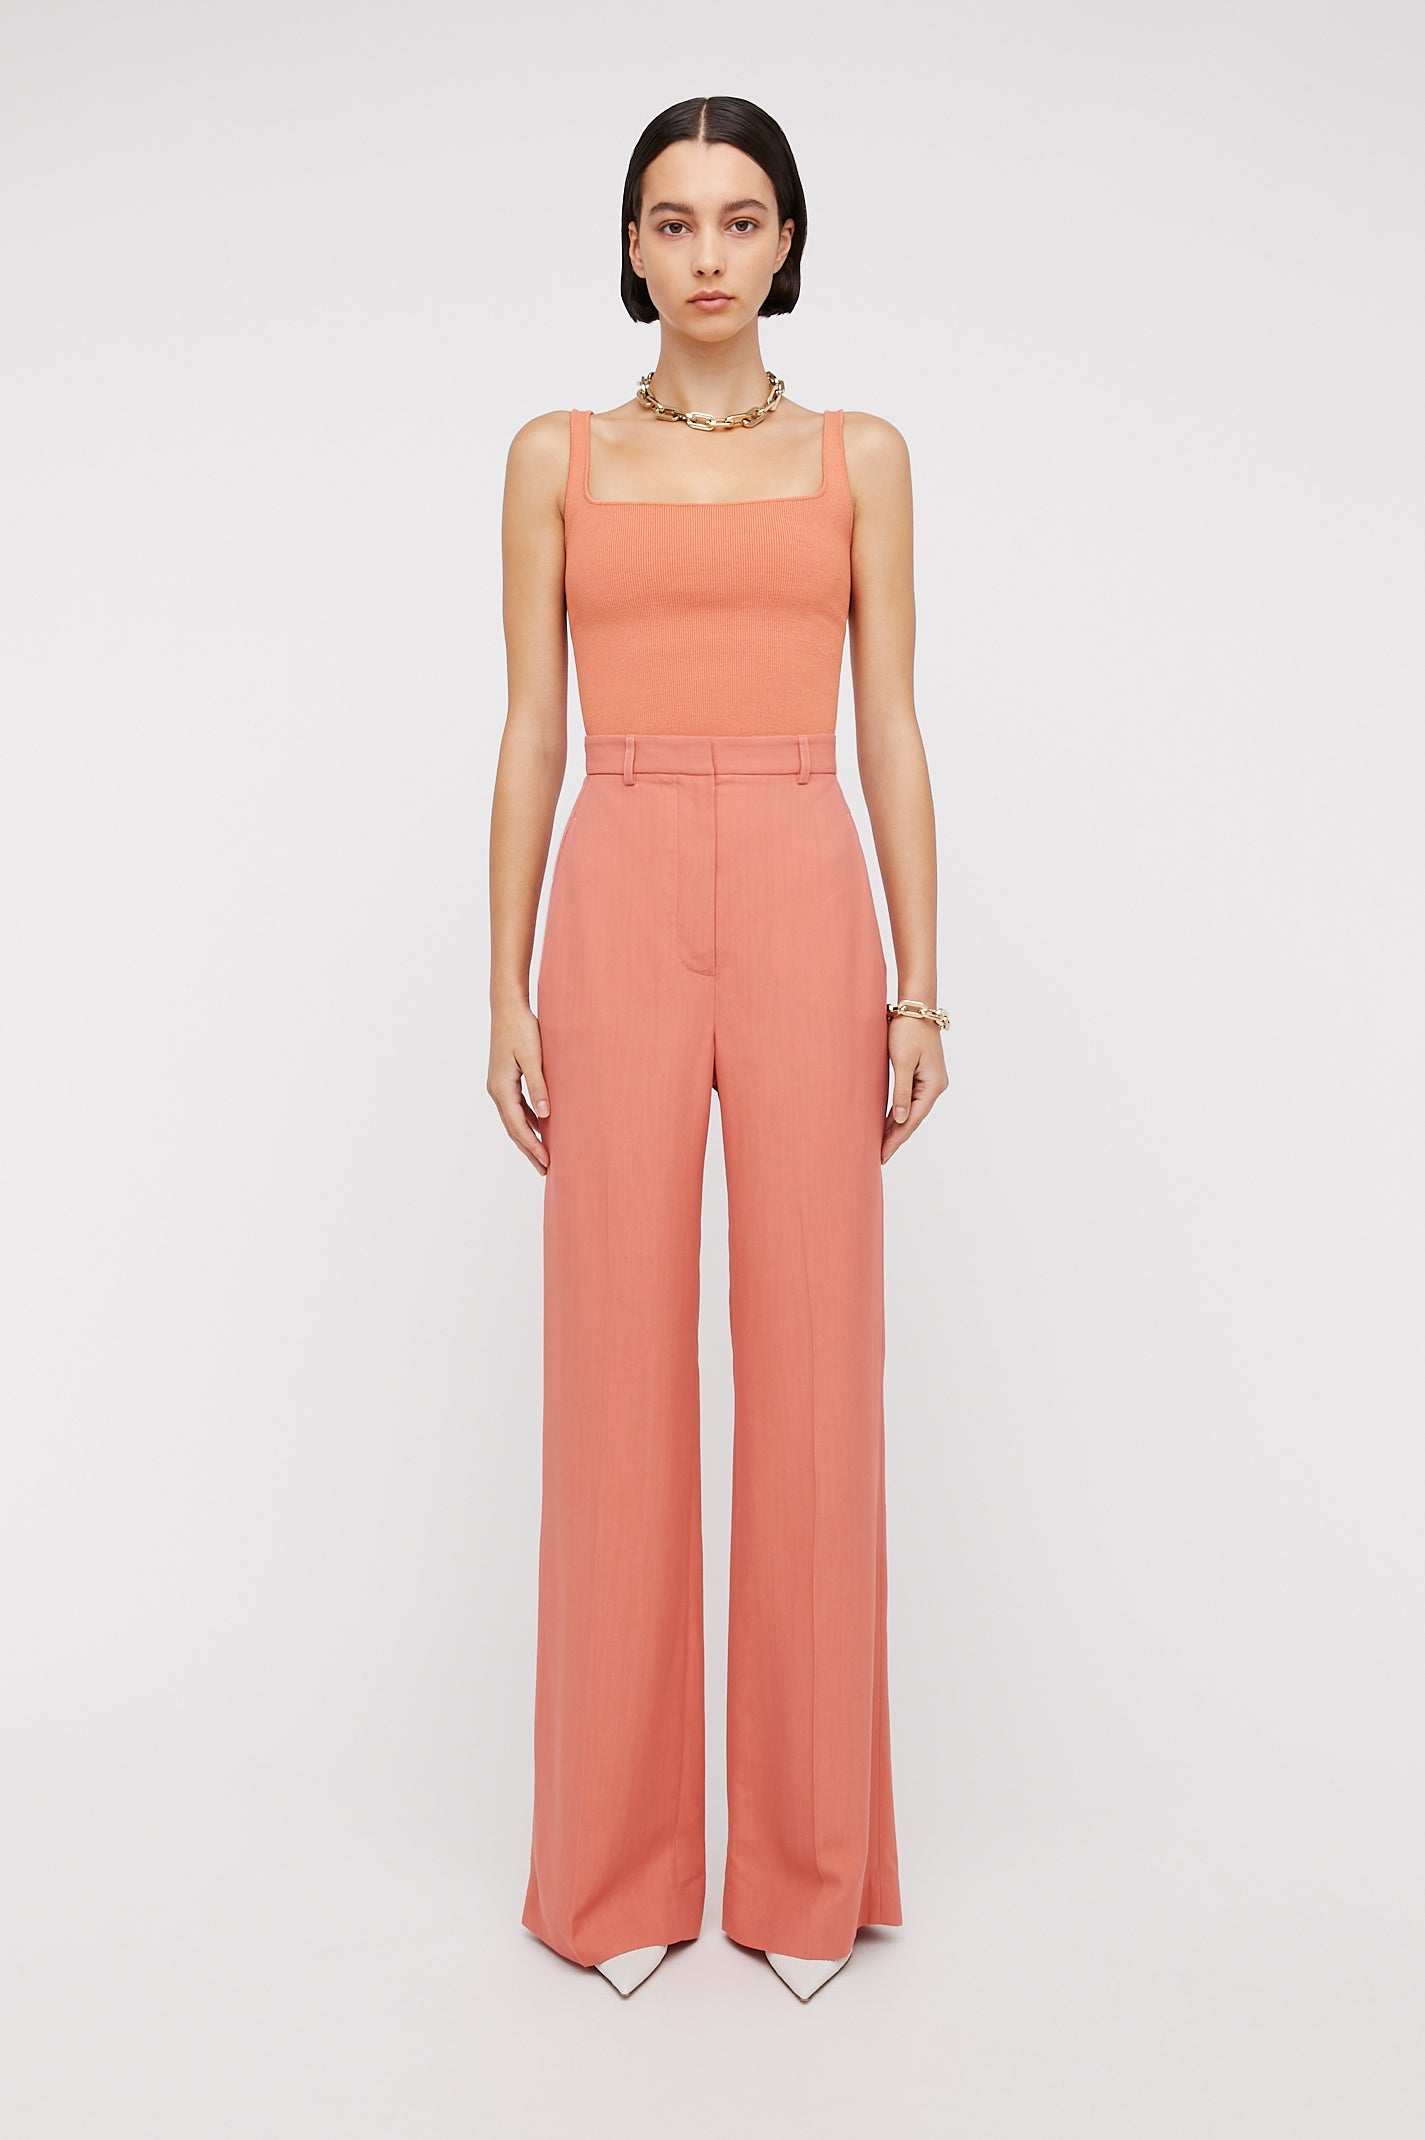 Crepe Knit Square Camisole Coral CORAL - Scanlan Theodore US